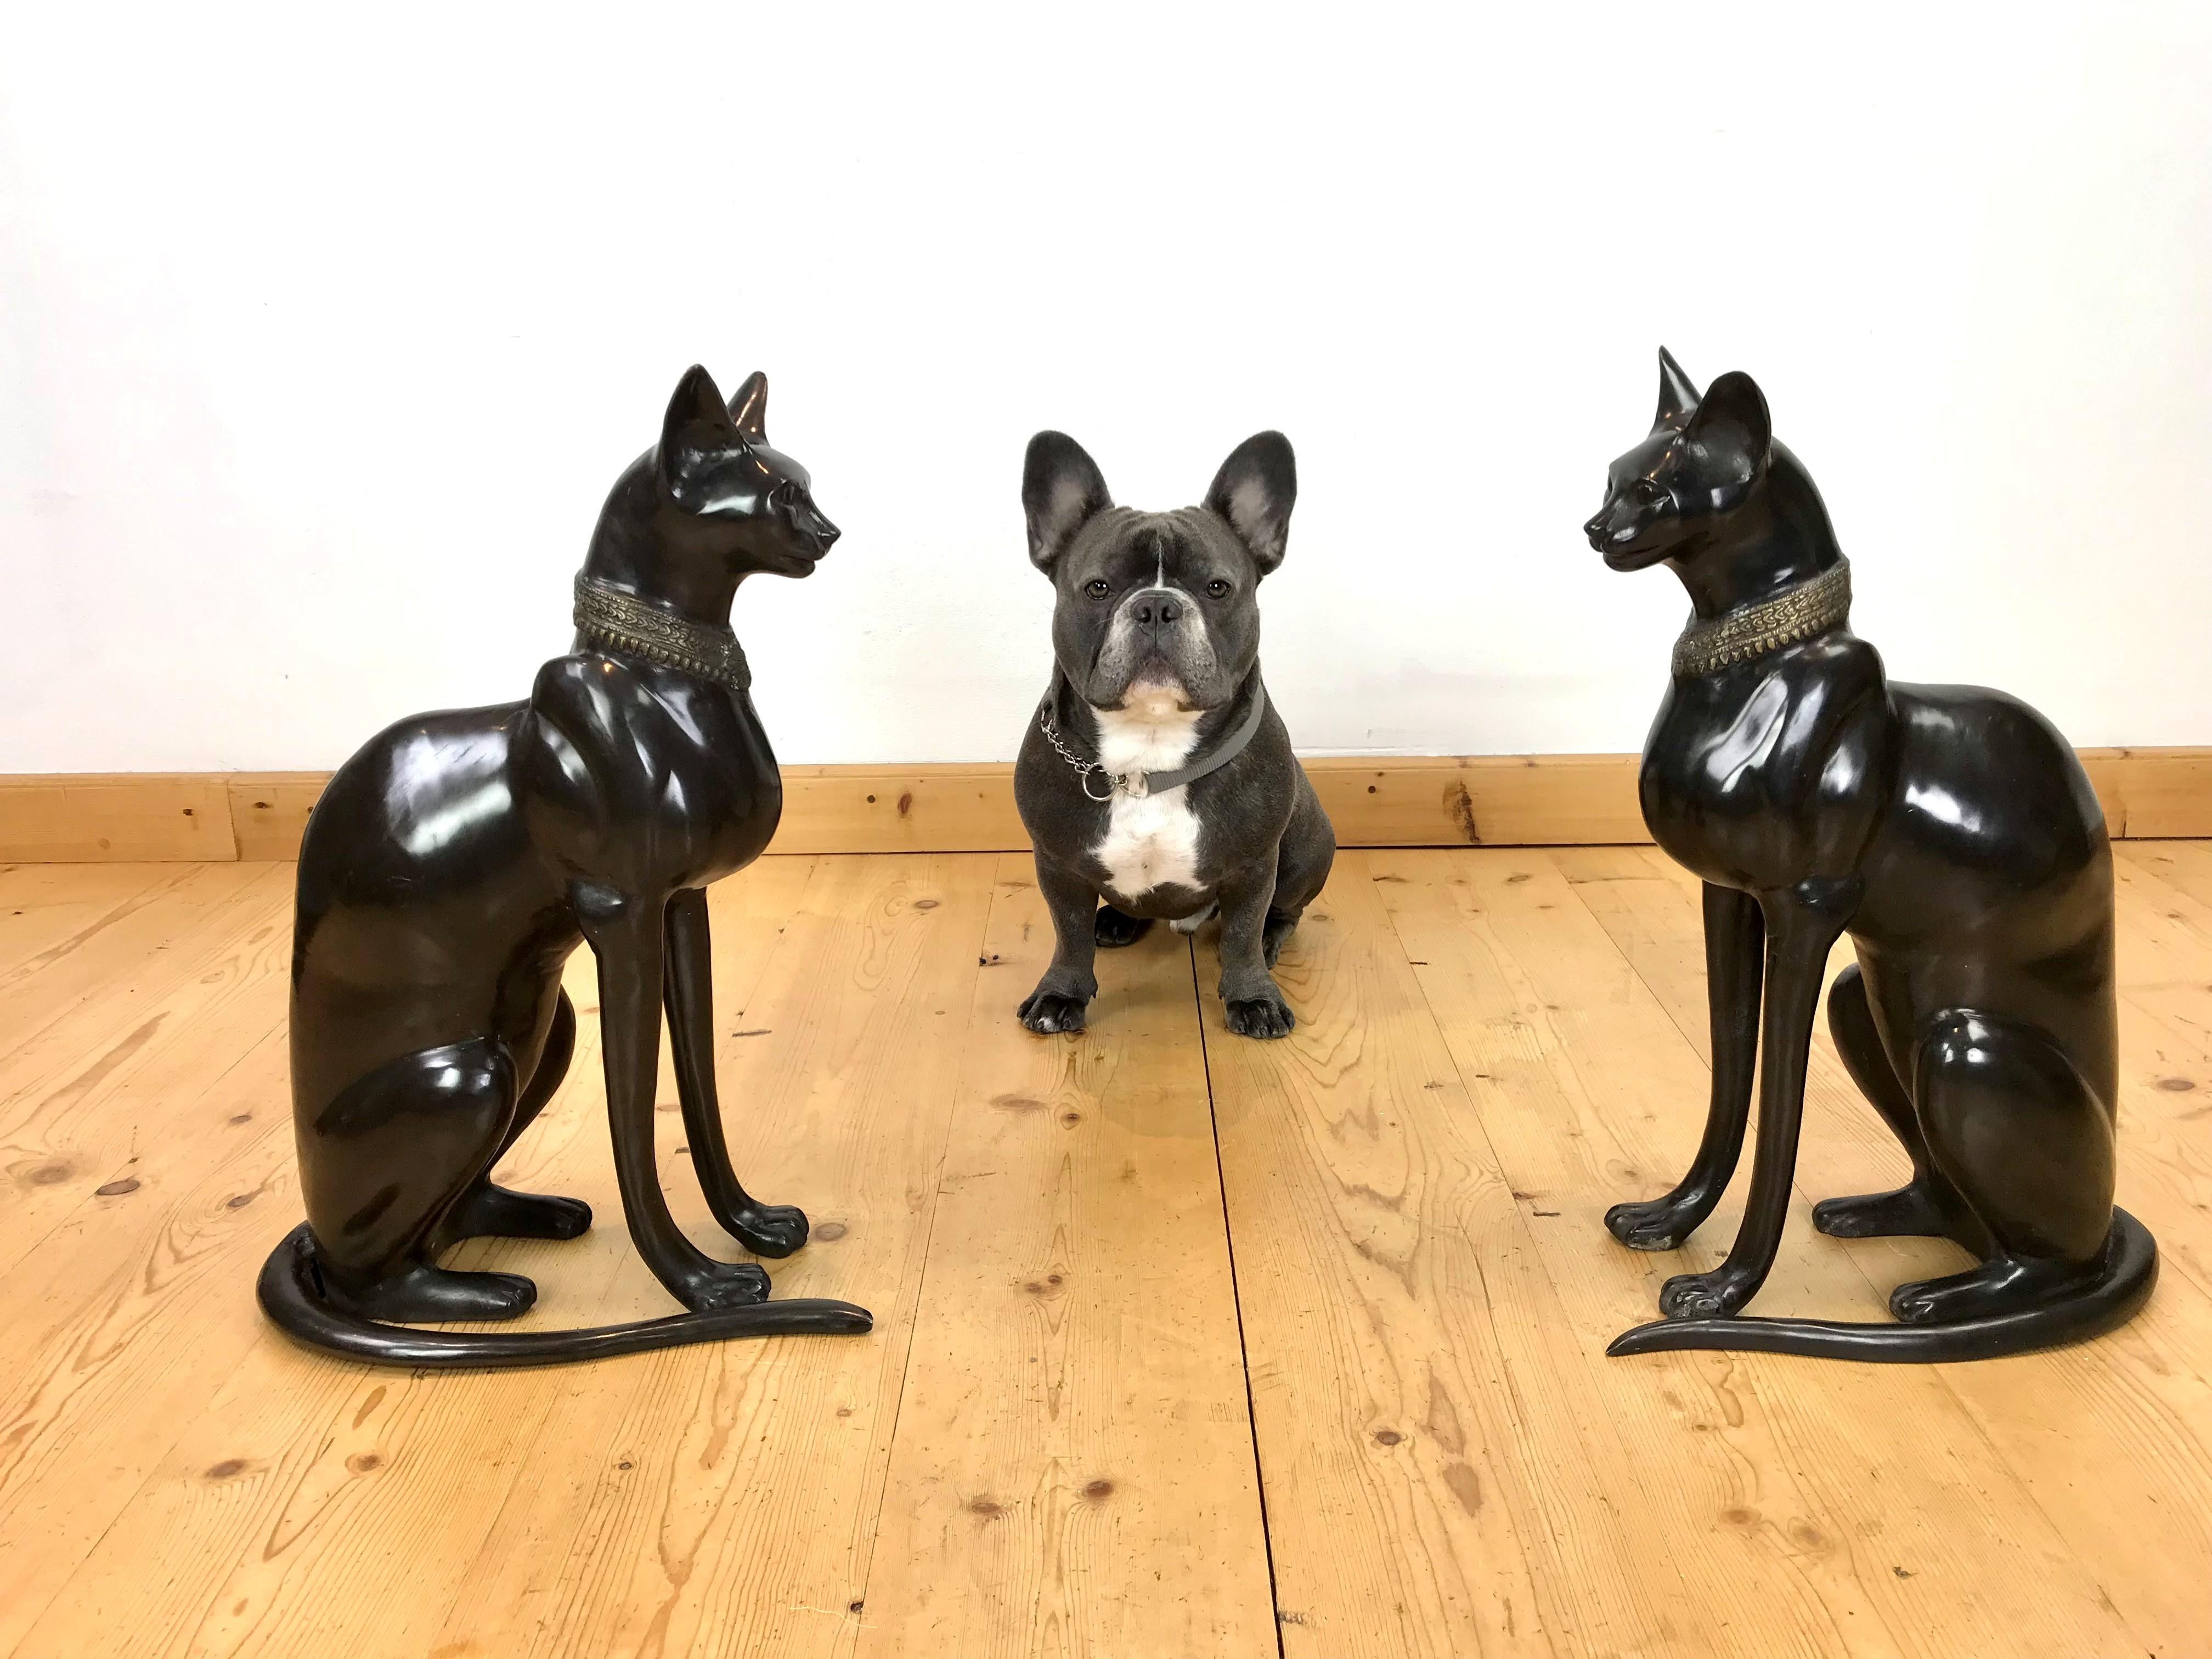 Vintage pair of bronze Egyptian Sphynx Cats in Art Deco Style. 
These seated Egyptian Style Sphinx cats are in dark brown patinated bronze with a gold-plated collar around the neck. It's a lifesize couple of cat sculptures with their tale on